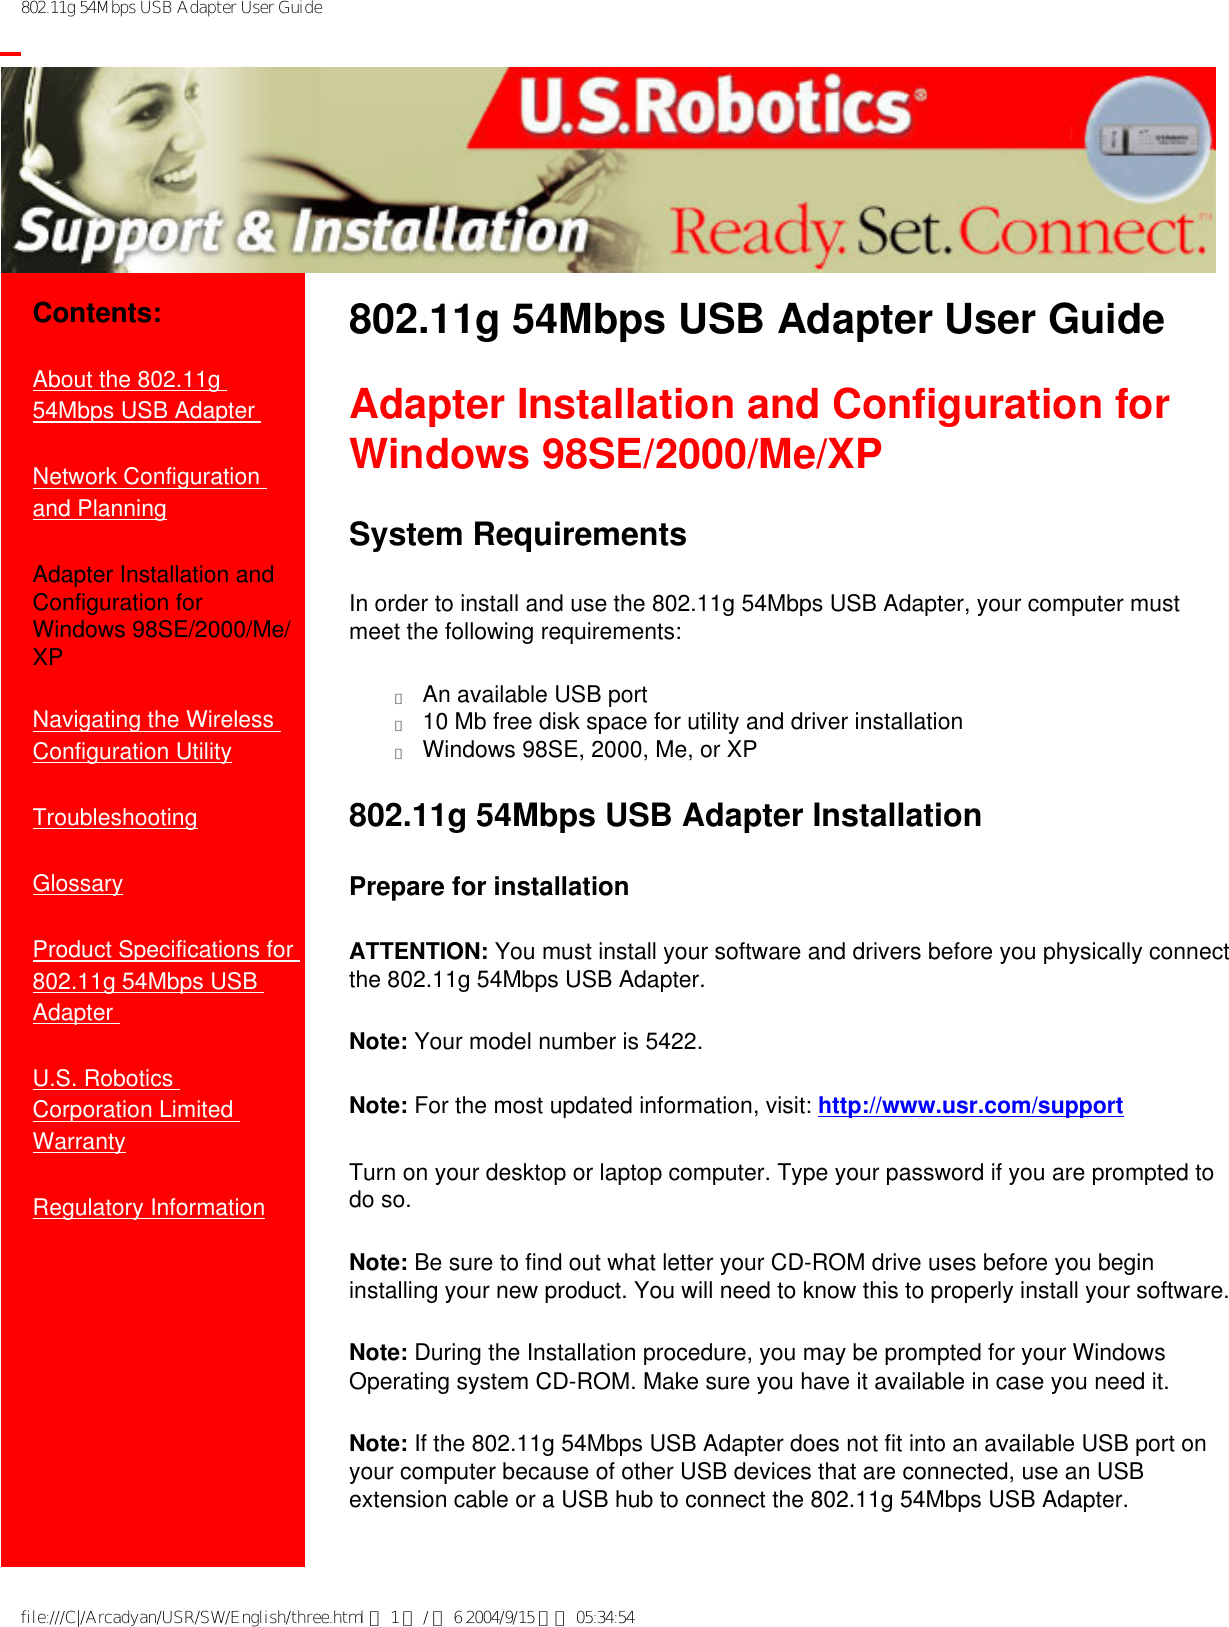 802.11g 54Mbps USB Adapter User Guide           Contents:About the 802.11g 54Mbps USB Adapter Network Configuration and Planning Adapter Installation and Configuration for Windows 98SE/2000/Me/XP Navigating the Wireless Configuration UtilityTroubleshooting Glossary Product Specifications for 802.11g 54Mbps USB Adapter U.S. Robotics Corporation Limited Warranty Regulatory Information802.11g 54Mbps USB Adapter User Guide Adapter Installation and Configuration for Windows 98SE/2000/Me/XP System RequirementsIn order to install and use the 802.11g 54Mbps USB Adapter, your computer must meet the following requirements: ●     An available USB port●     10 Mb free disk space for utility and driver installation●     Windows 98SE, 2000, Me, or XP802.11g 54Mbps USB Adapter InstallationPrepare for installationATTENTION: You must install your software and drivers before you physically connect the 802.11g 54Mbps USB Adapter.Note: Your model number is 5422.Note: For the most updated information, visit: http://www.usr.com/supportTurn on your desktop or laptop computer. Type your password if you are prompted to do so.Note: Be sure to find out what letter your CD-ROM drive uses before you begin installing your new product. You will need to know this to properly install your software.Note: During the Installation procedure, you may be prompted for your Windows Operating system CD-ROM. Make sure you have it available in case you need it.Note: If the 802.11g 54Mbps USB Adapter does not fit into an available USB port on your computer because of other USB devices that are connected, use an USB extension cable or a USB hub to connect the 802.11g 54Mbps USB Adapter.file:///C|/Arcadyan/USR/SW/English/three.html 第 1 頁 / 共 6 2004/9/15 下午 05:34:54